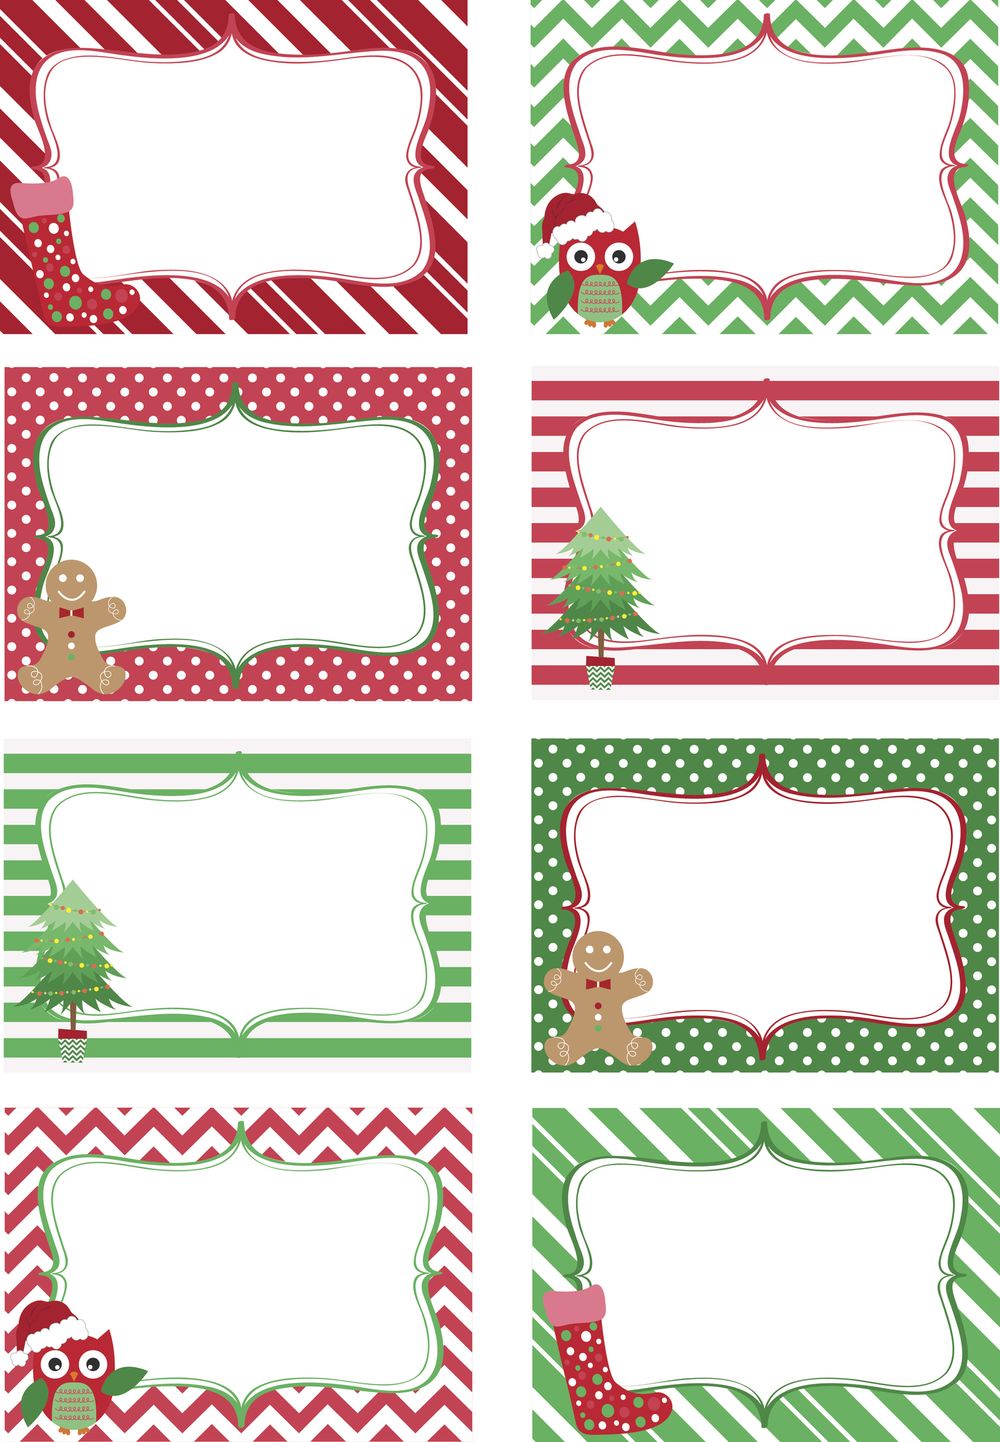 10 things I love about Christmas tags labels thought Christmas Stocking filler 